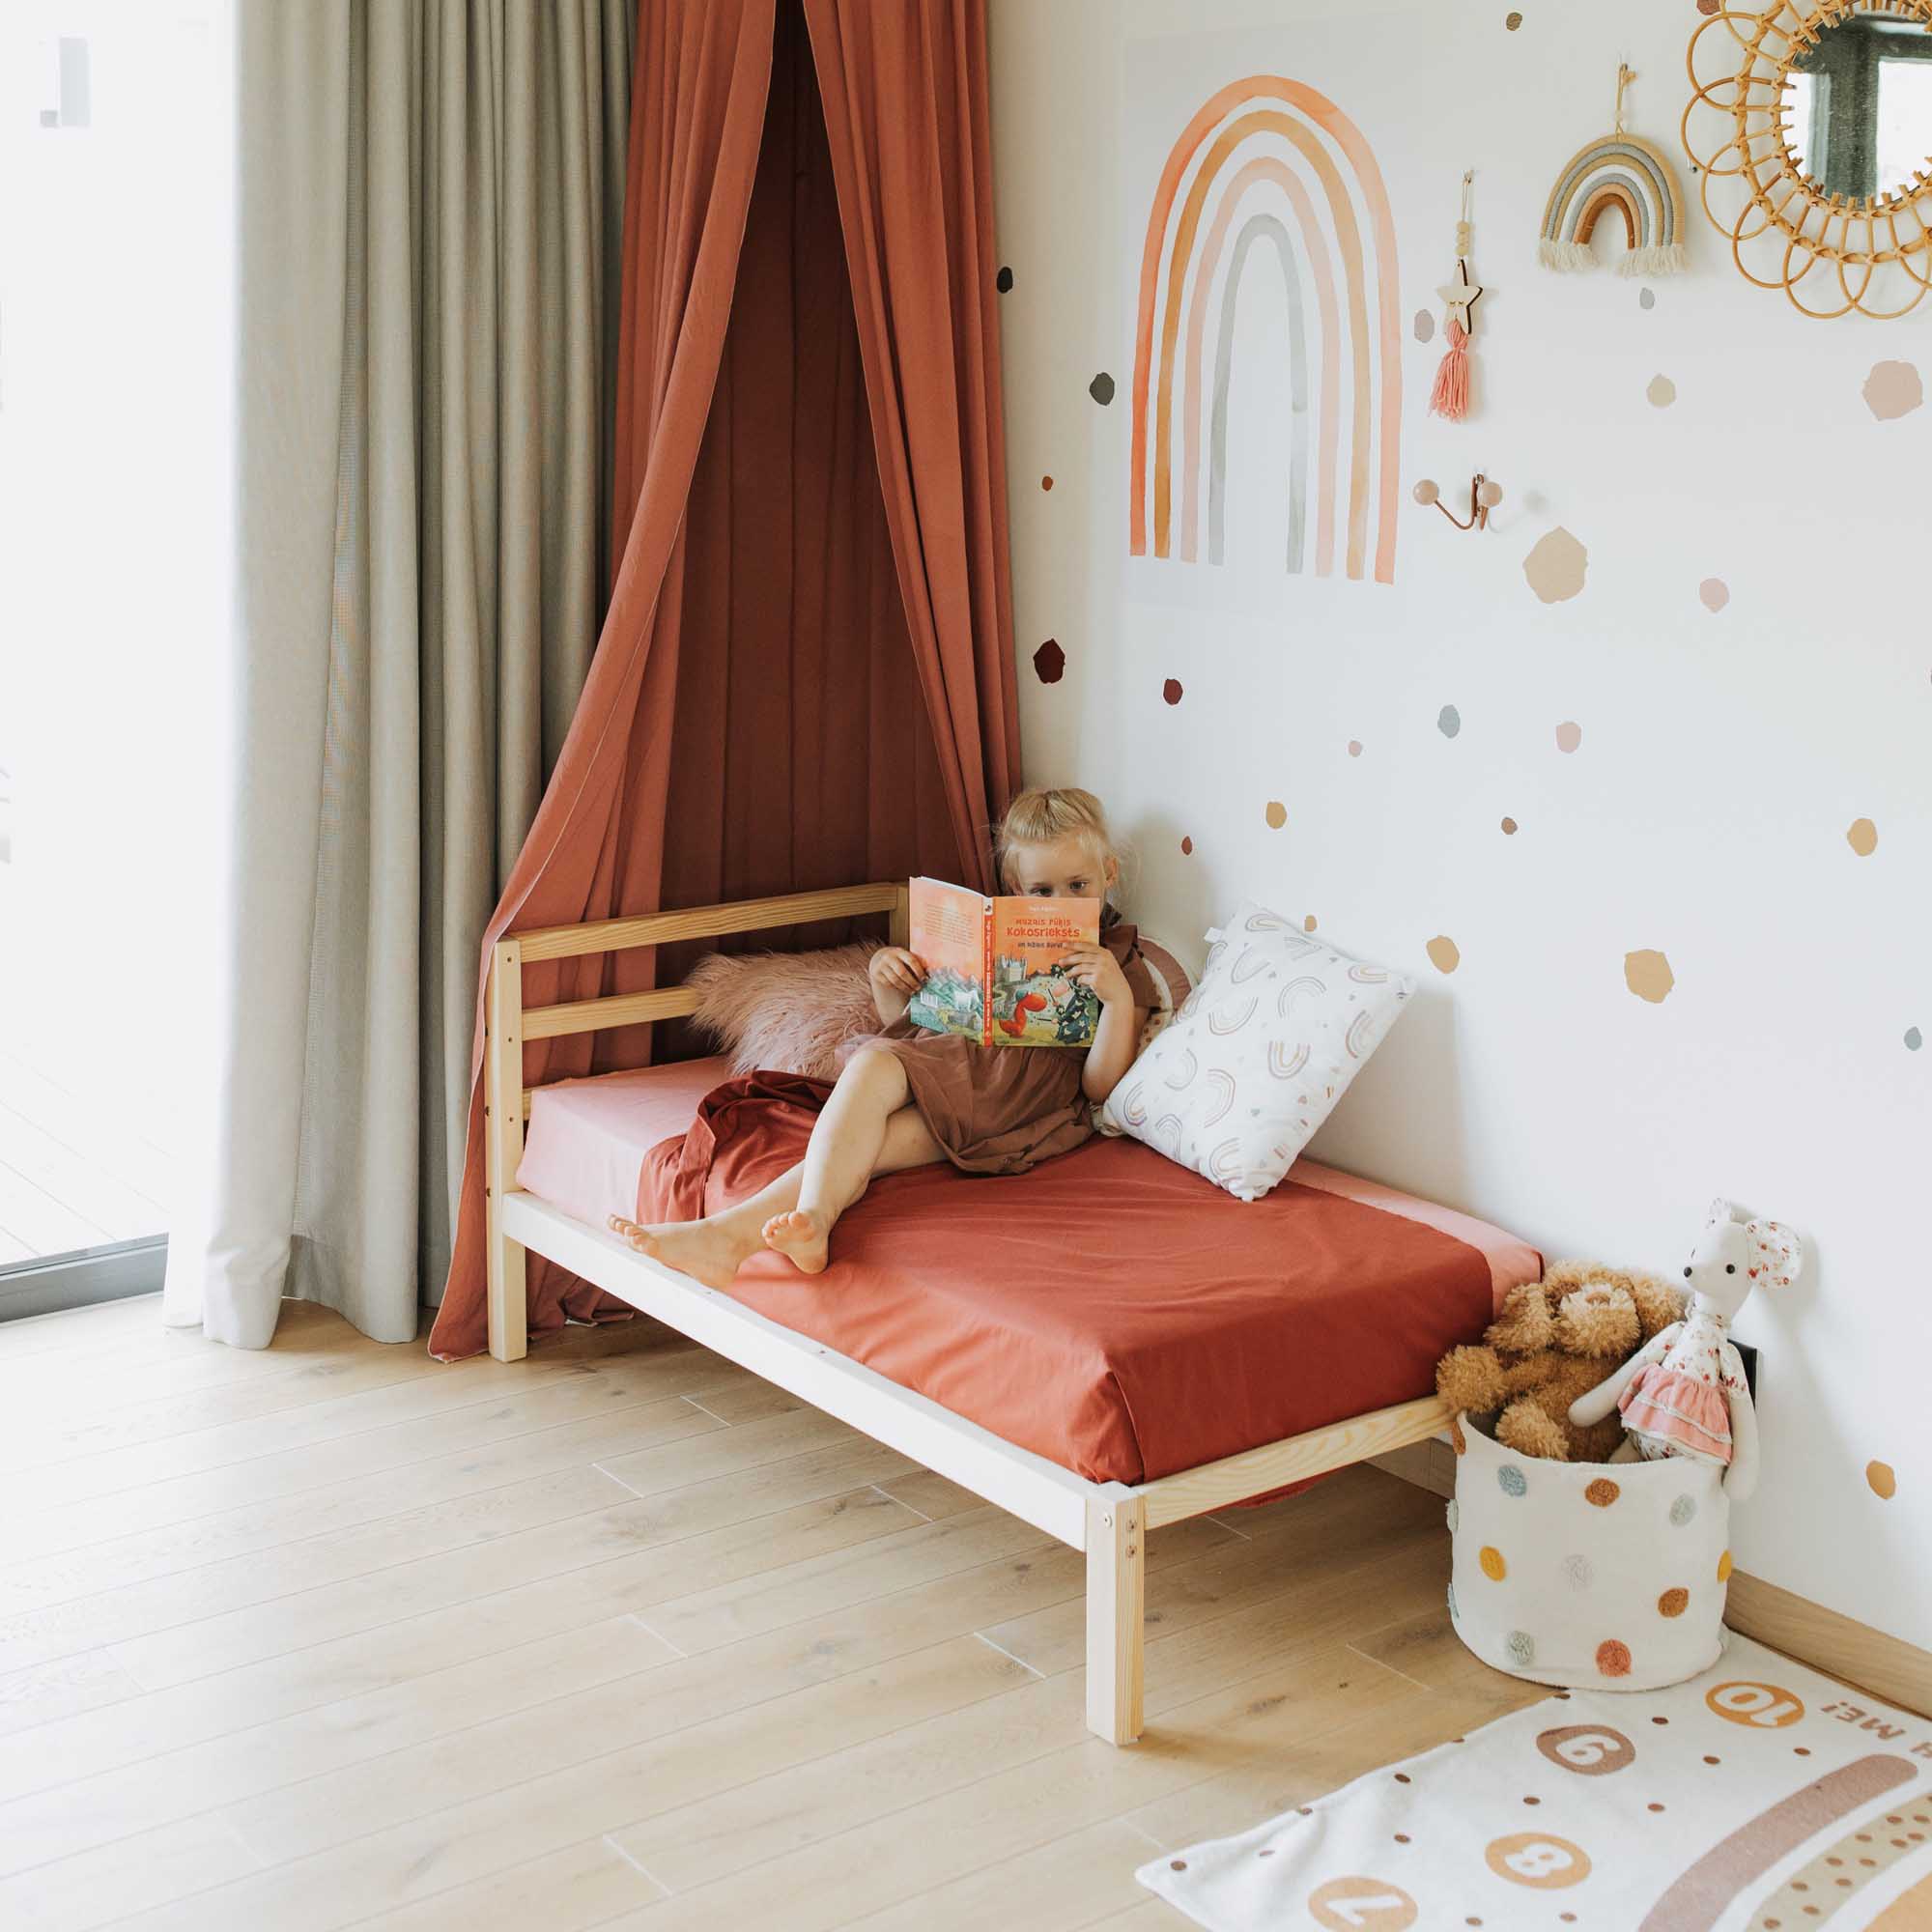 A child's room with a bed and a rainbow wall decal.